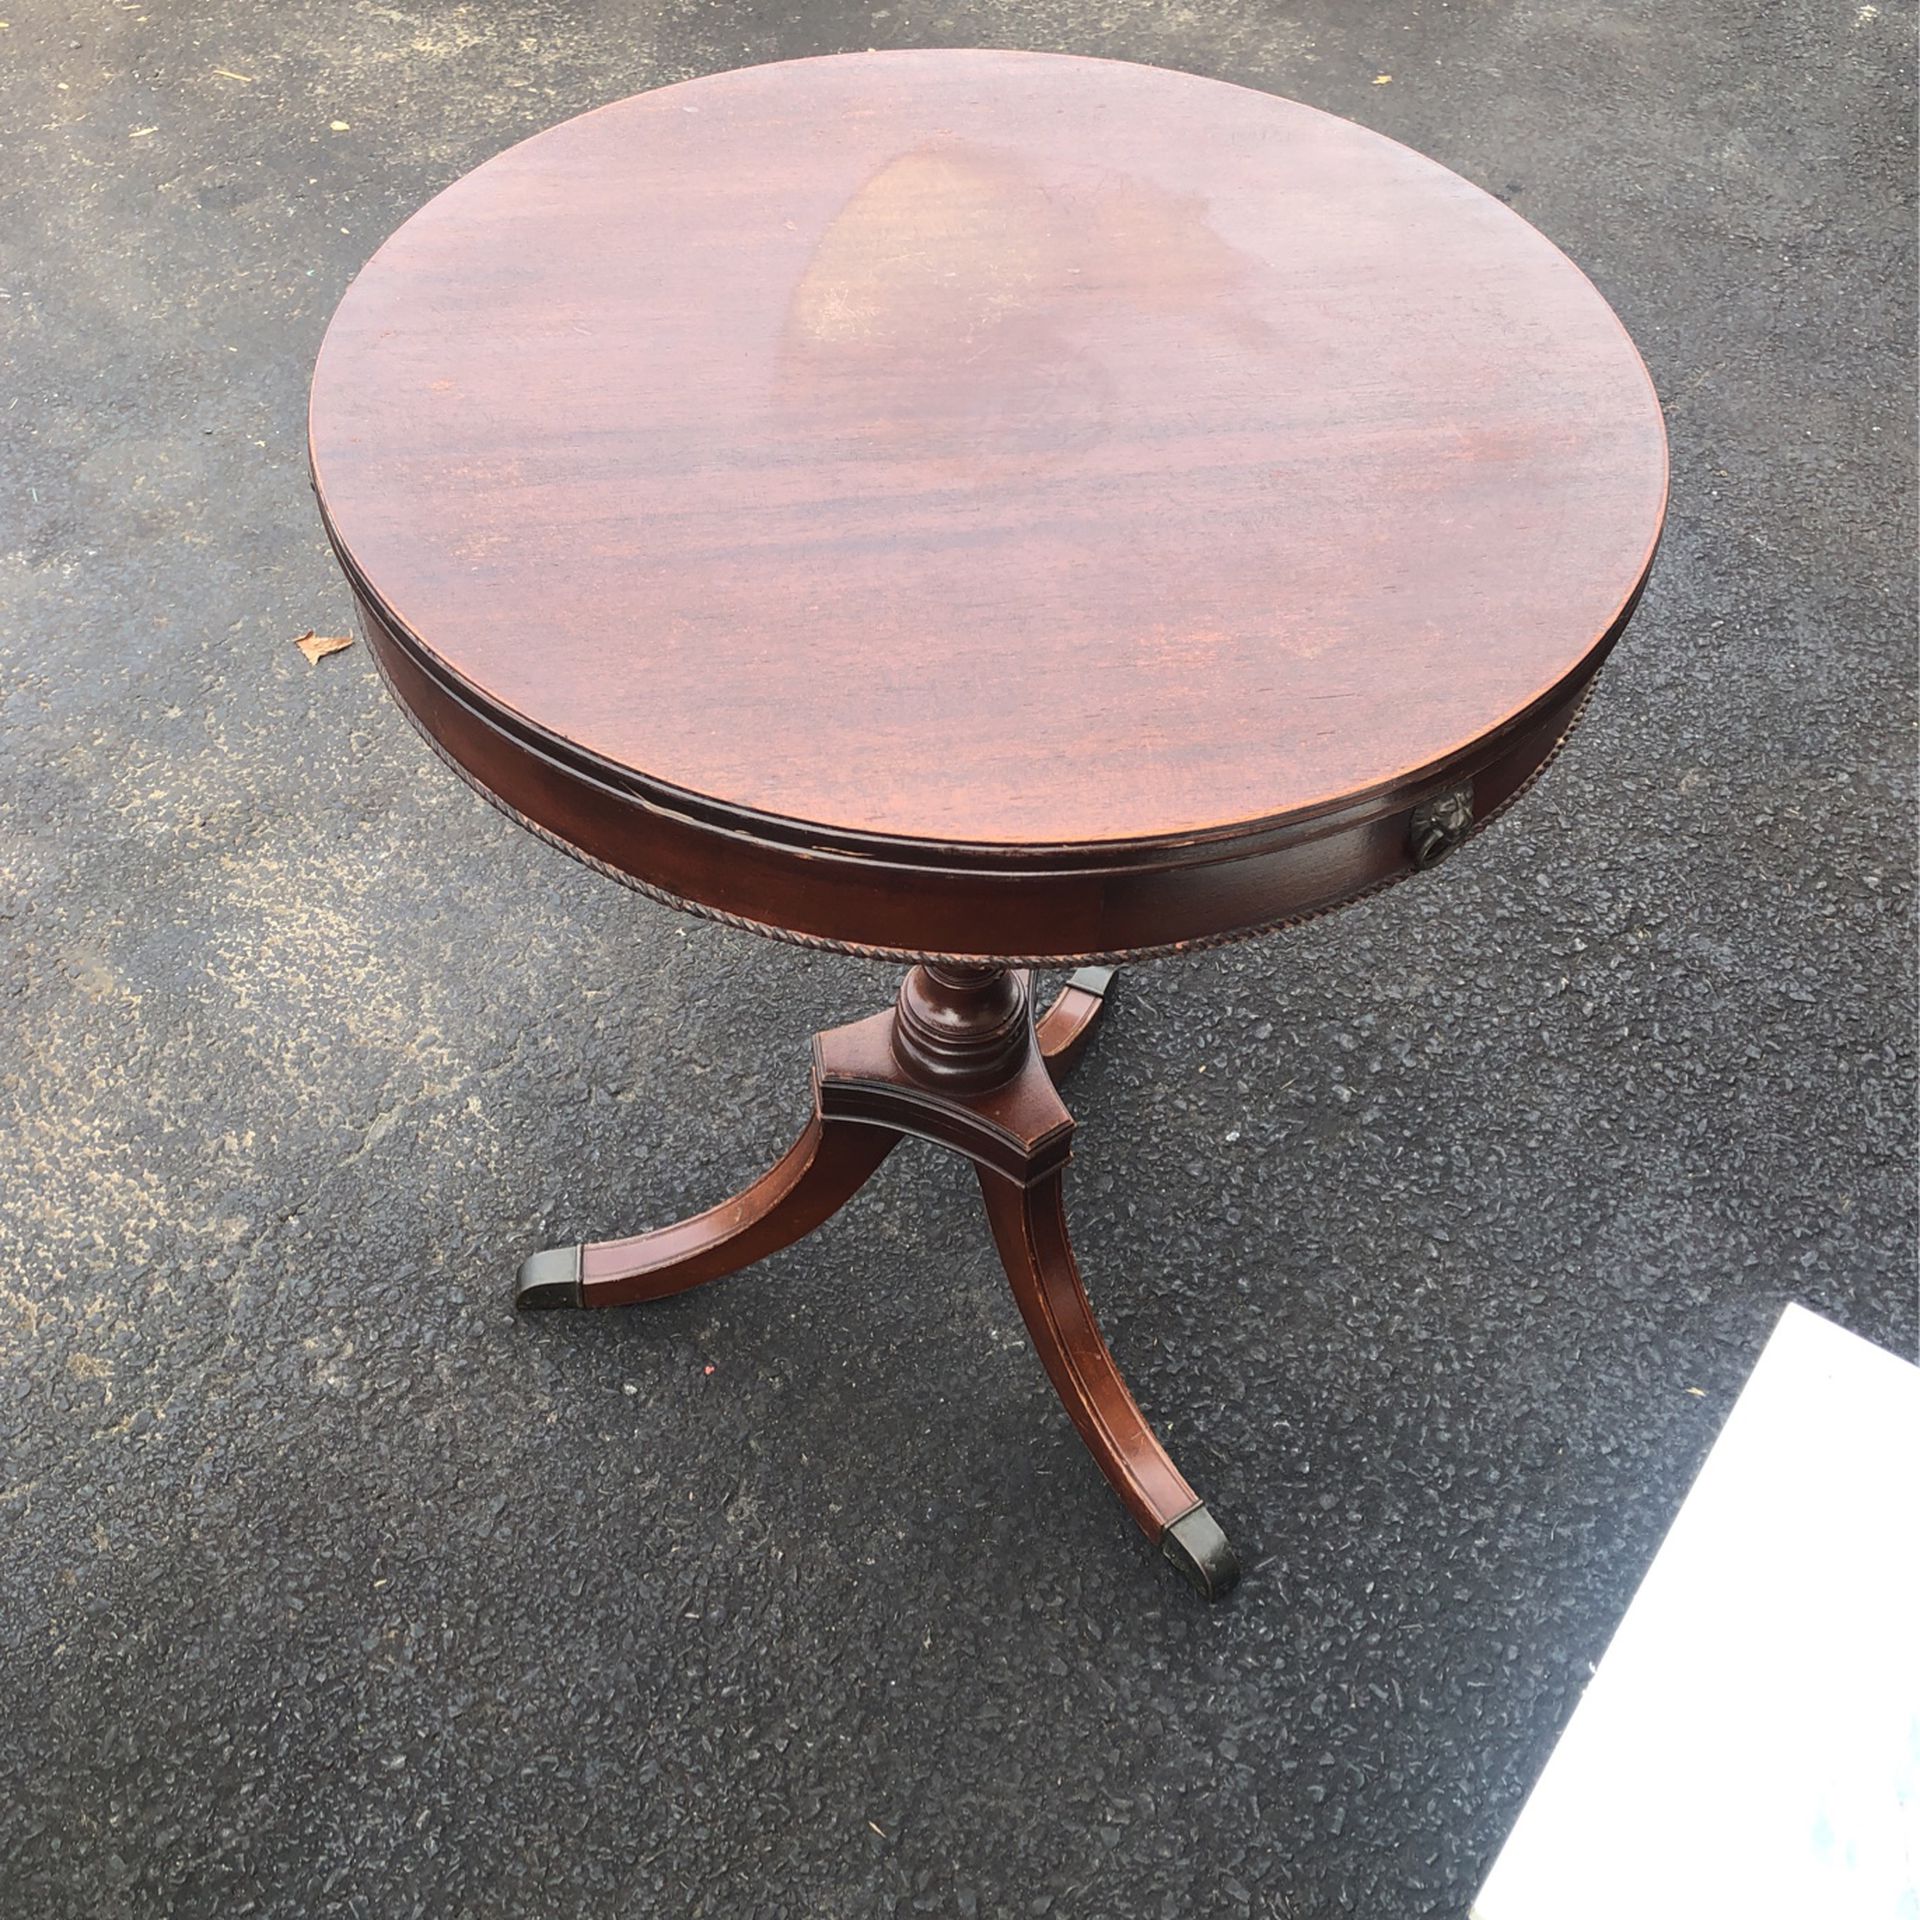 Antique Round Accent Table.  Asking $ 40.